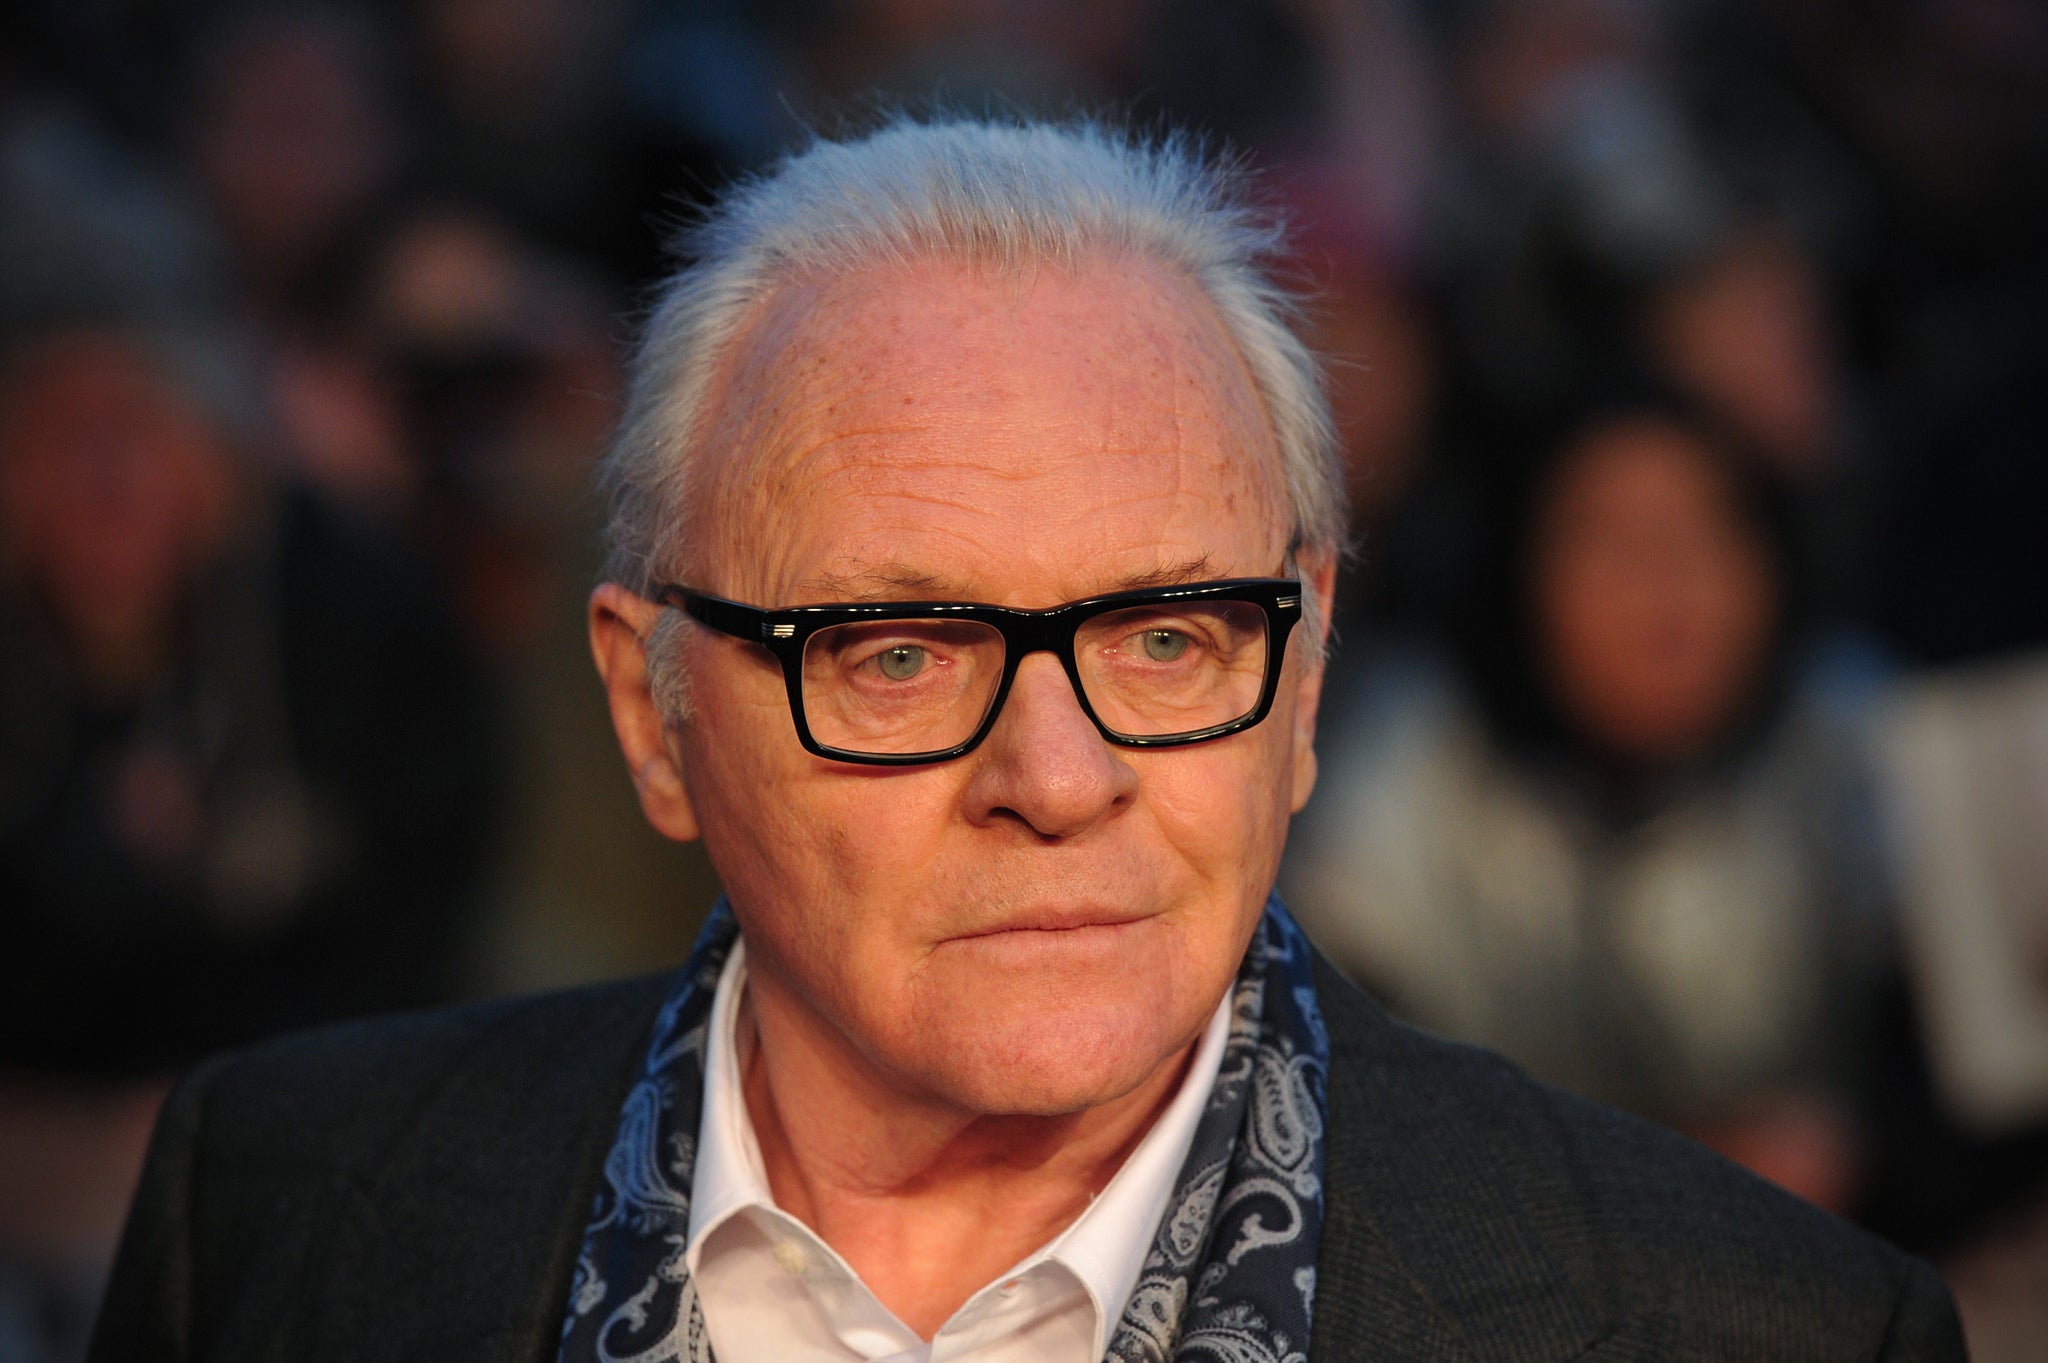 Sir Anthony Hopkins will star in the film alongside Nicholas Hoult and Felicity Jones